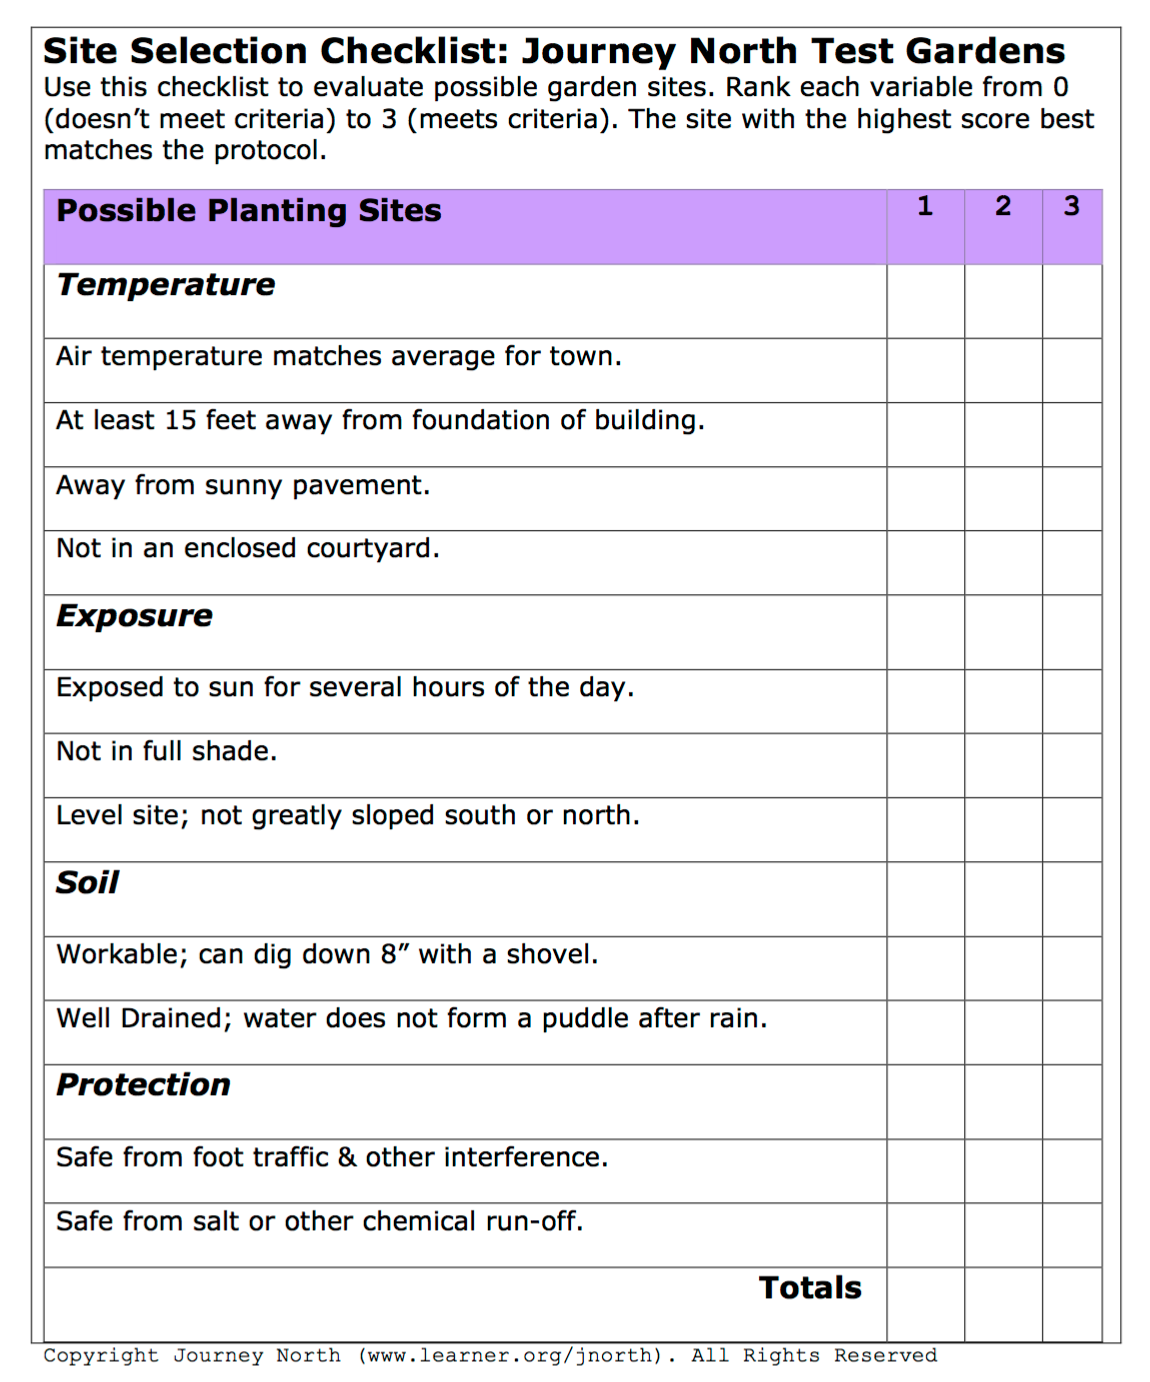 Image of the checklist for site selection in the garden